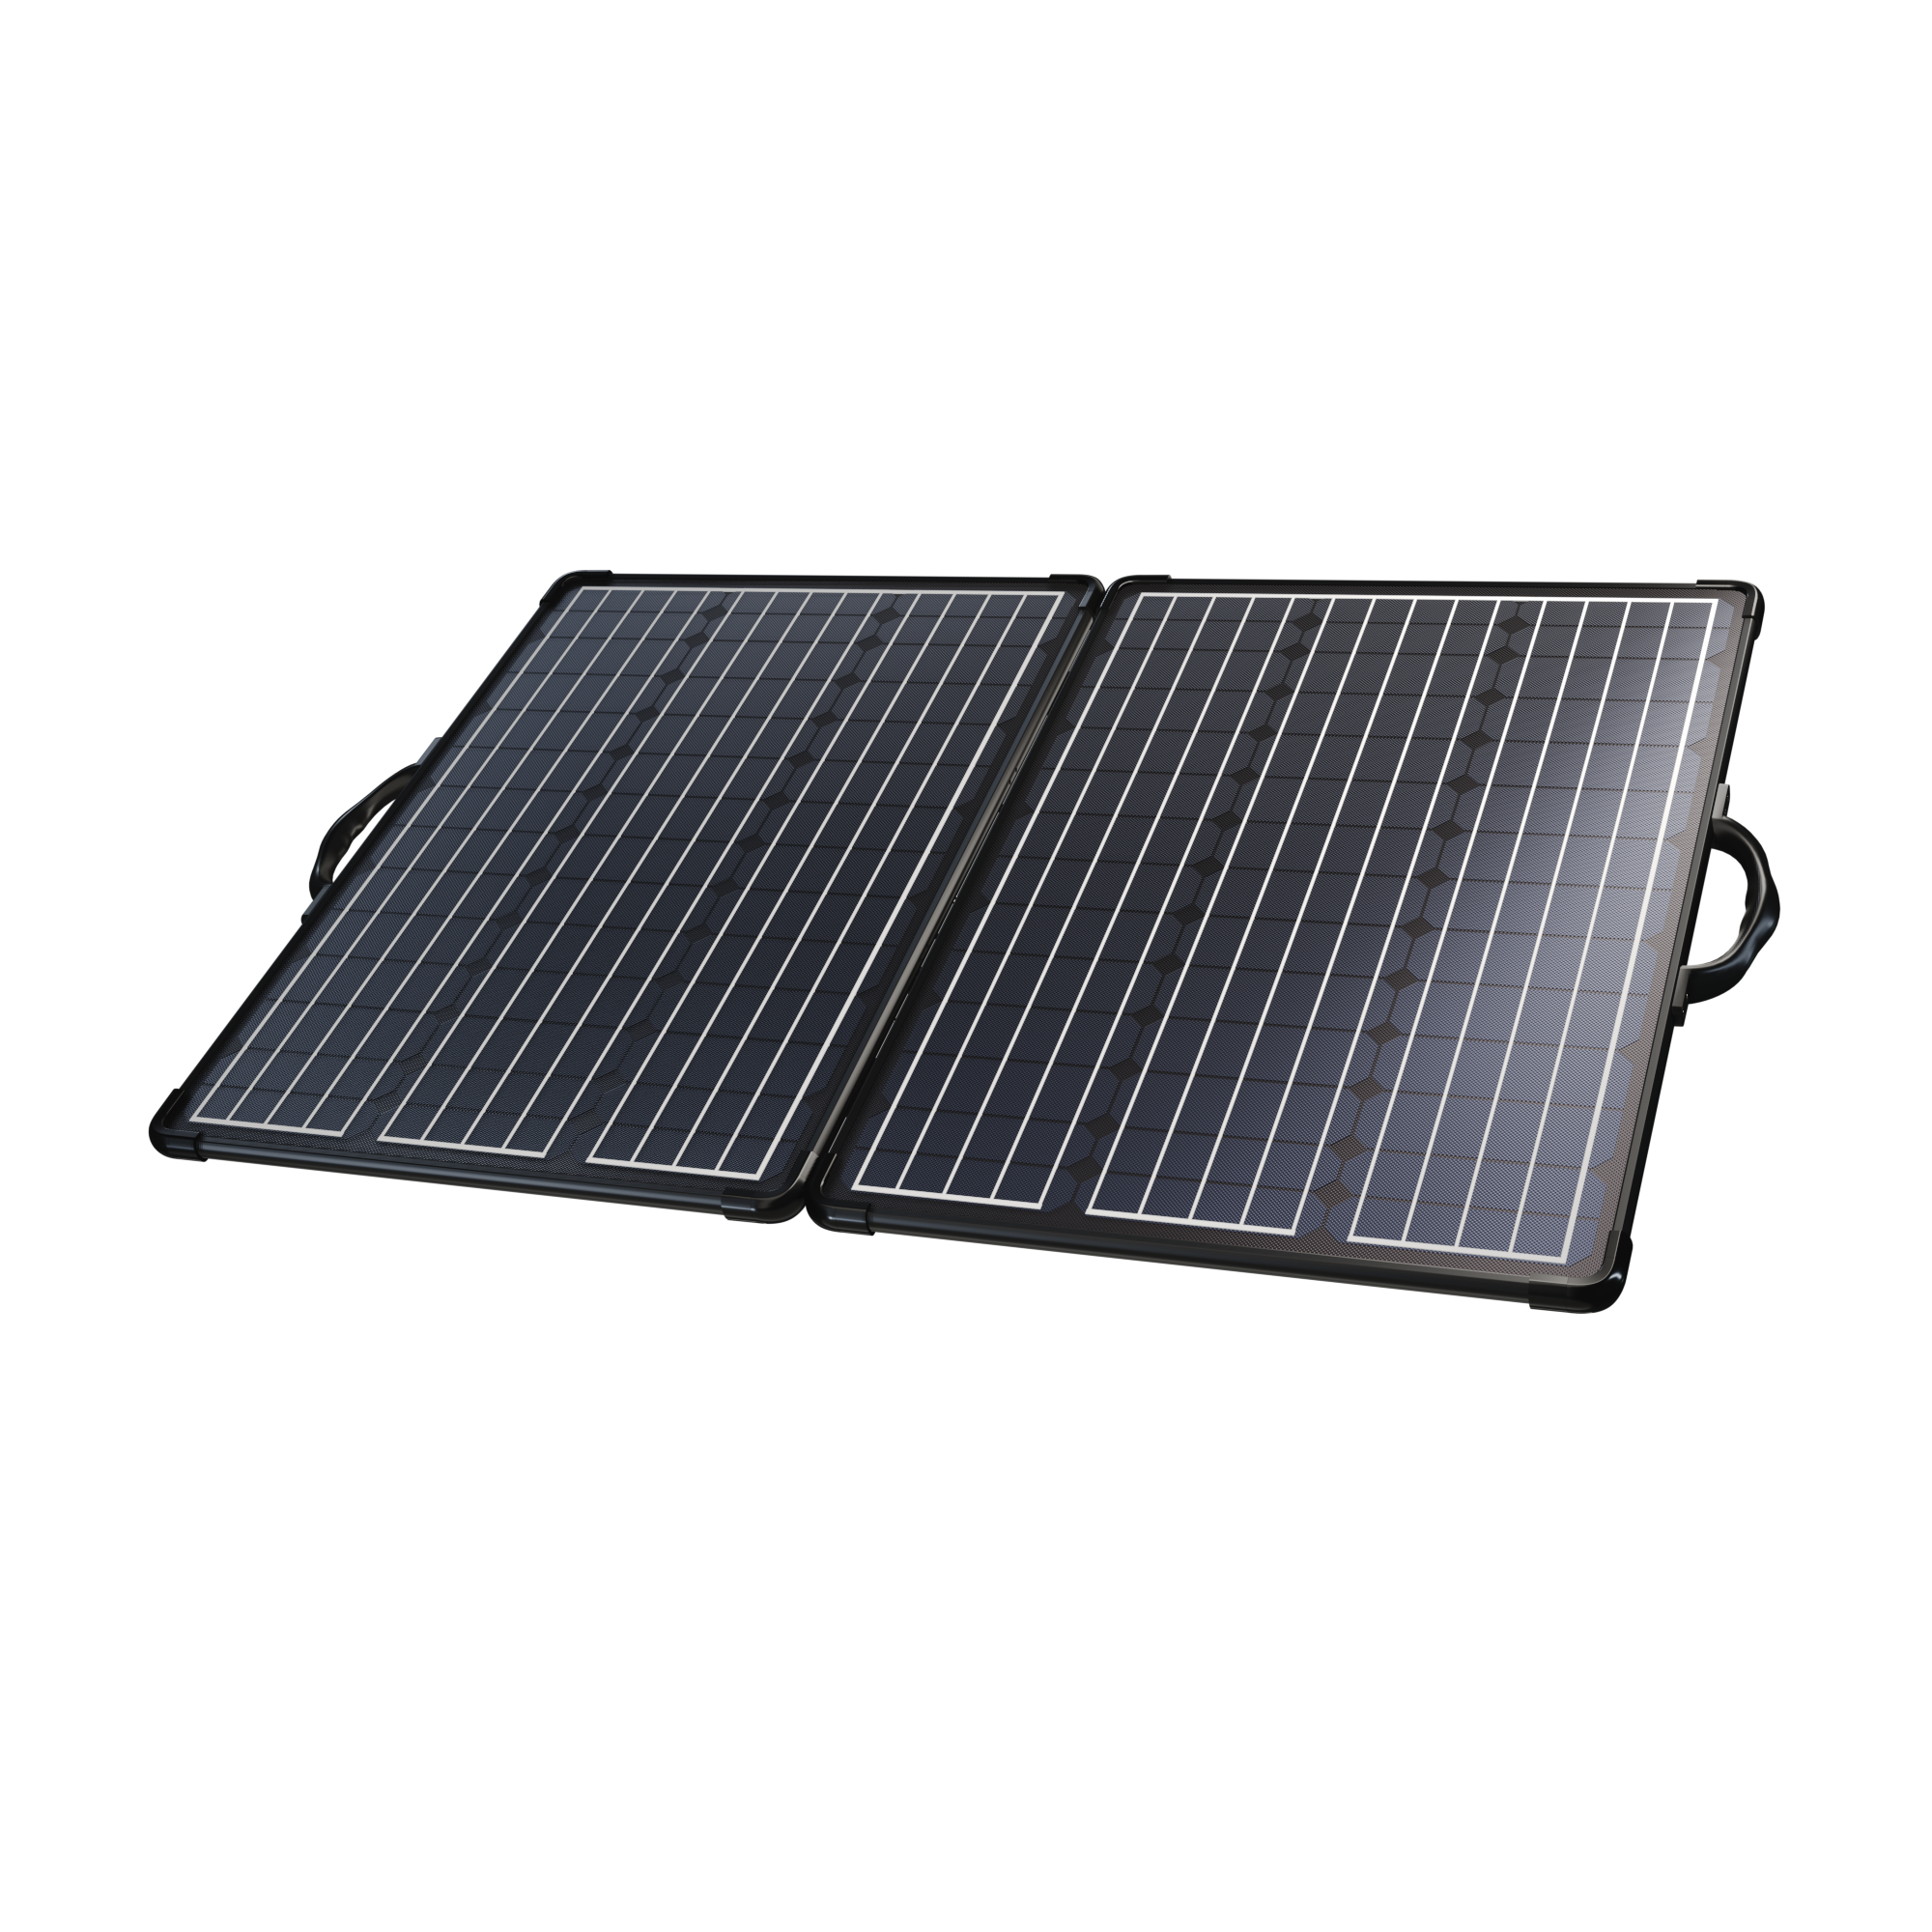 ACOPower Plk 120W Portable Solar Panel Kit, Lightweight Briefcase with 20A Charge Controller